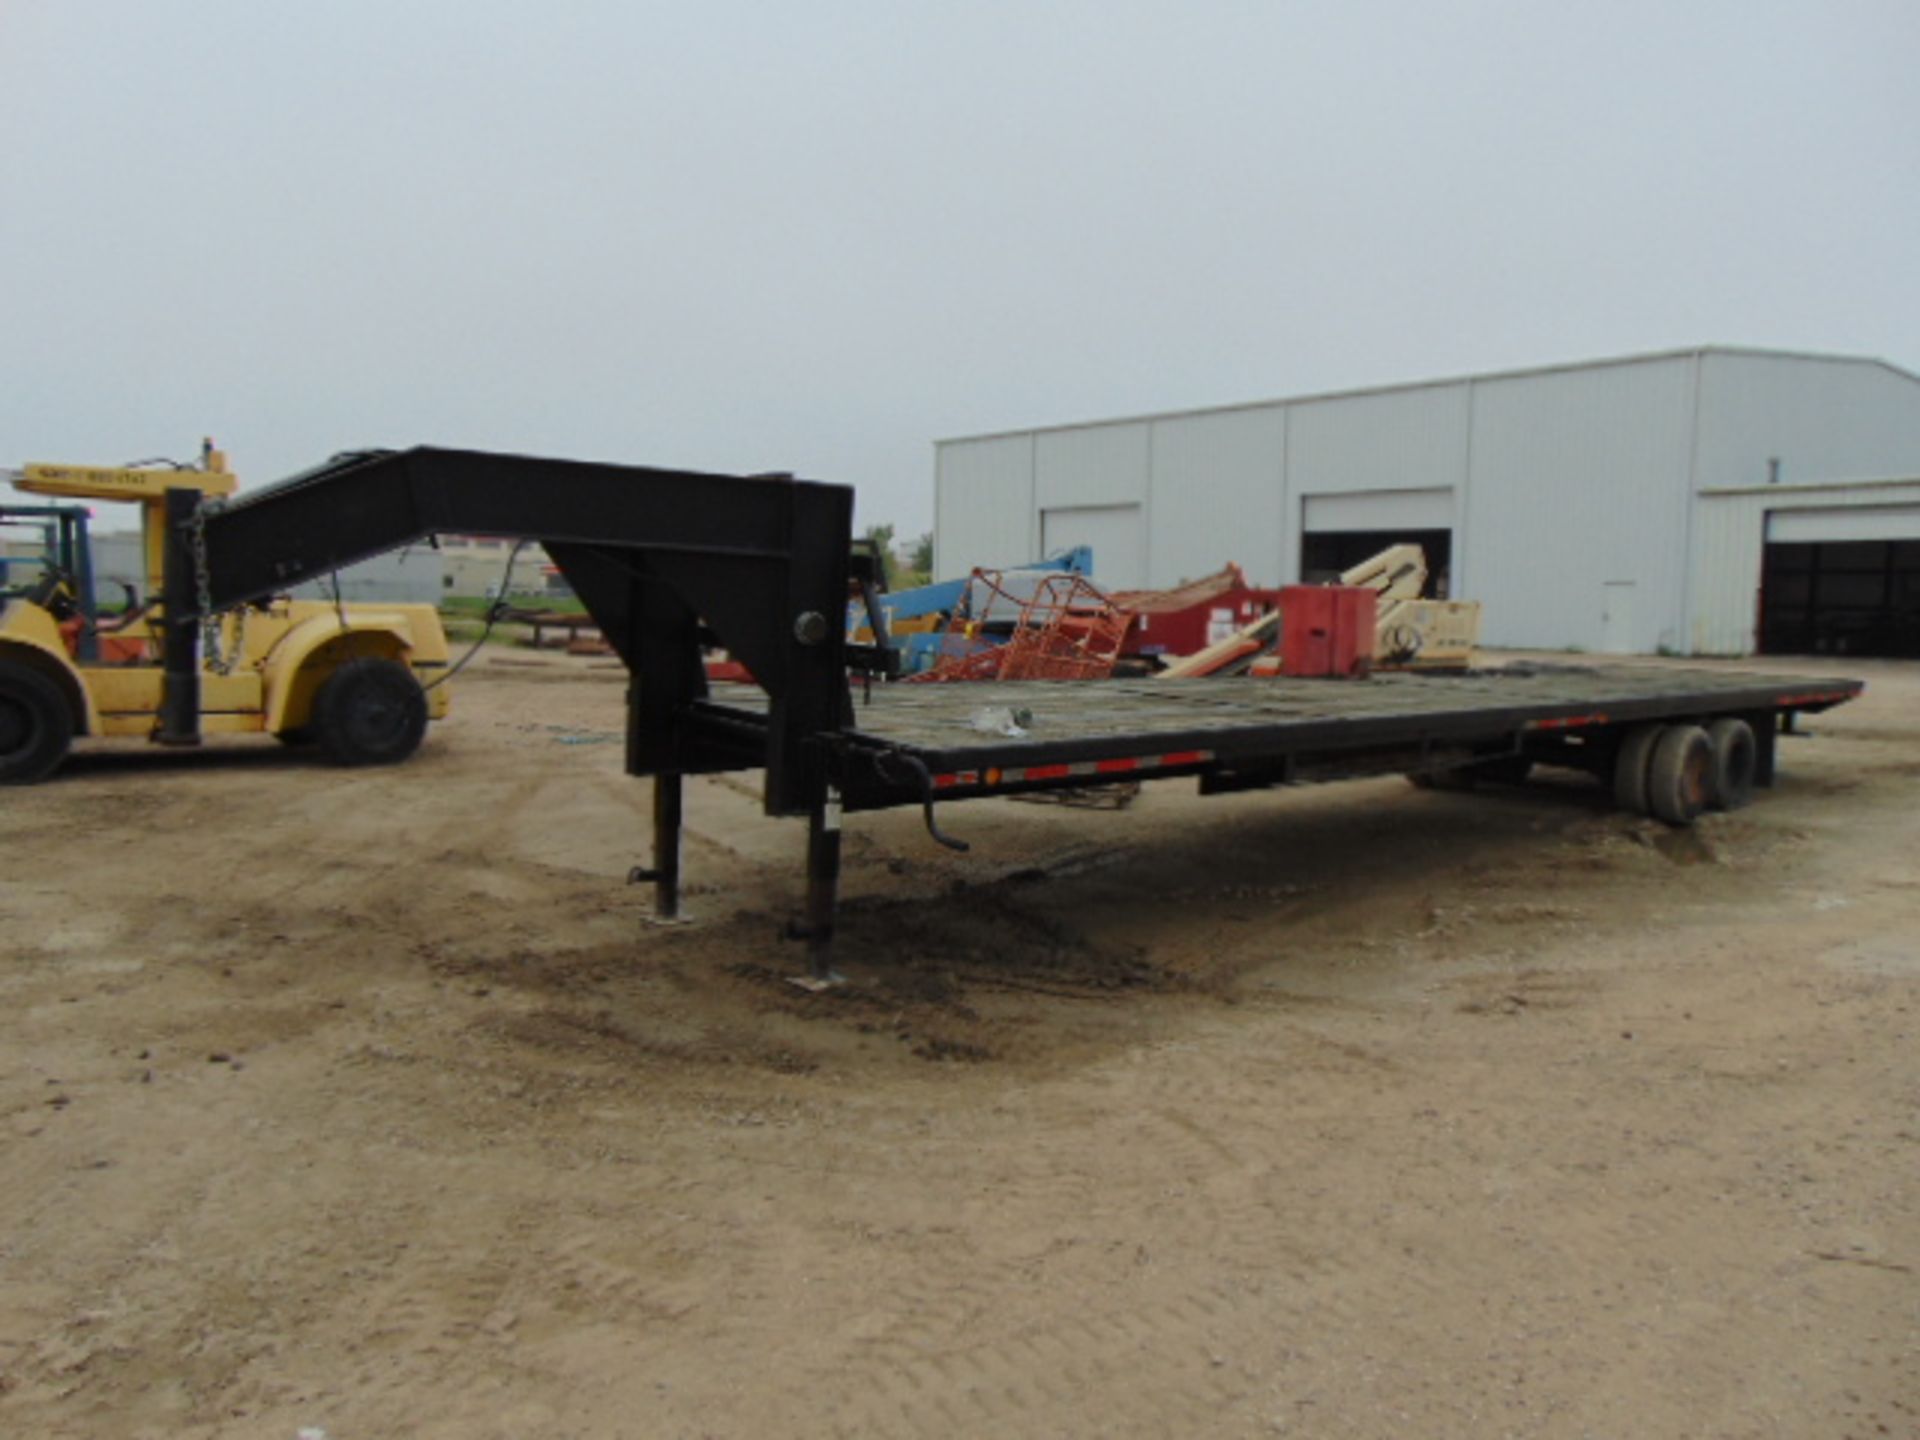 GOOSENECK YARD TRAILER, 40', wood deck, tandem axle (No title - for yard use only)